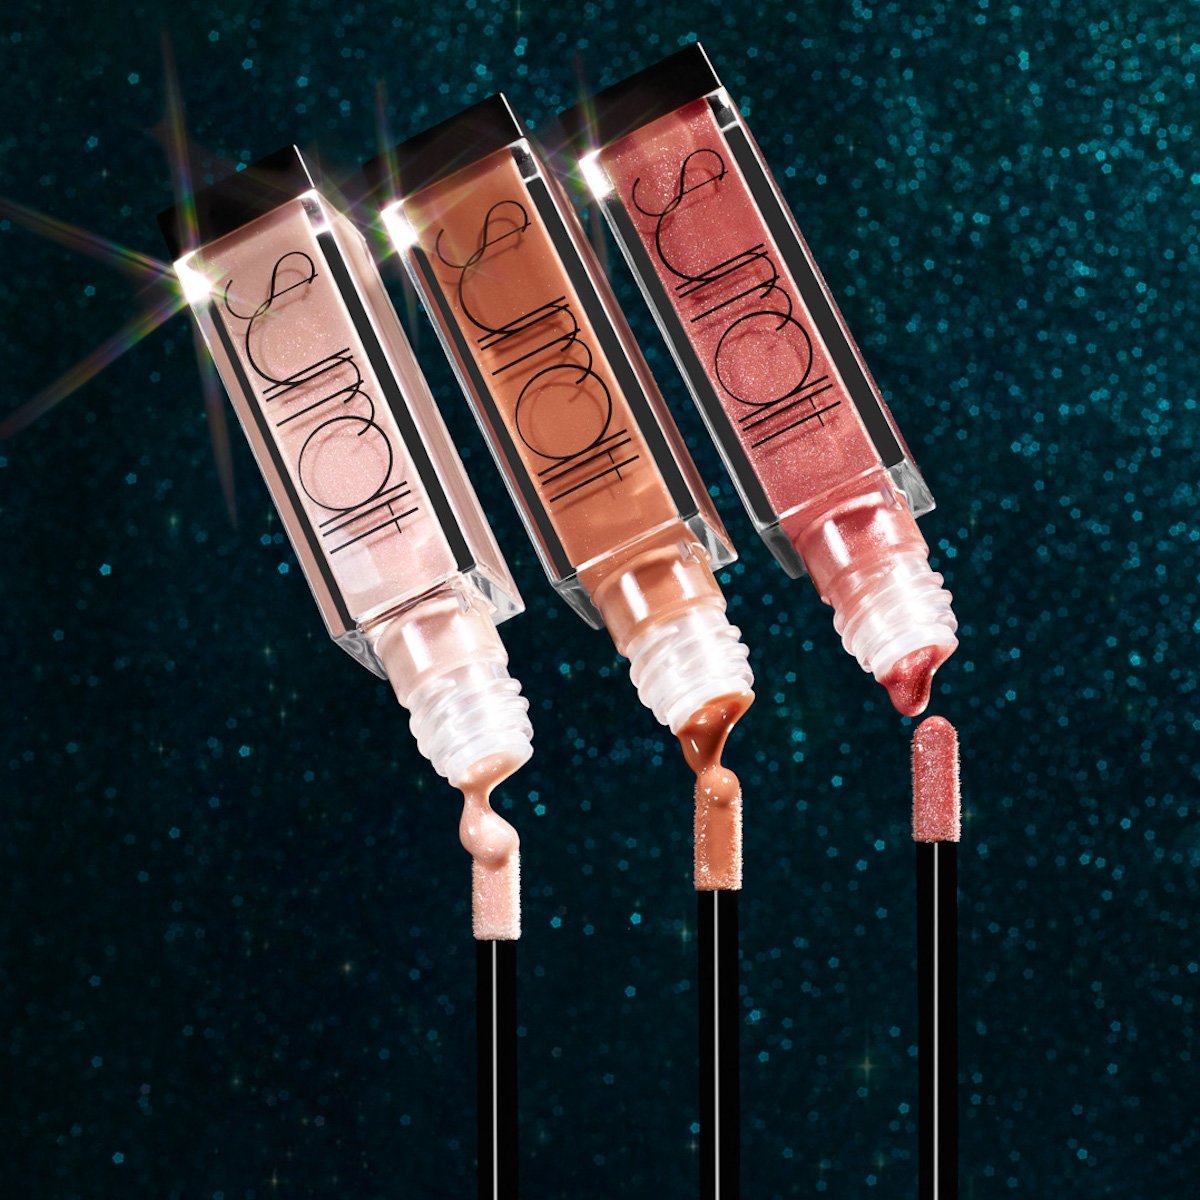 SOIGNE - WARM PINK WITH GOLD SHIMMER - non-sticky, high-shine formula in various pink and bronze shades with texture 